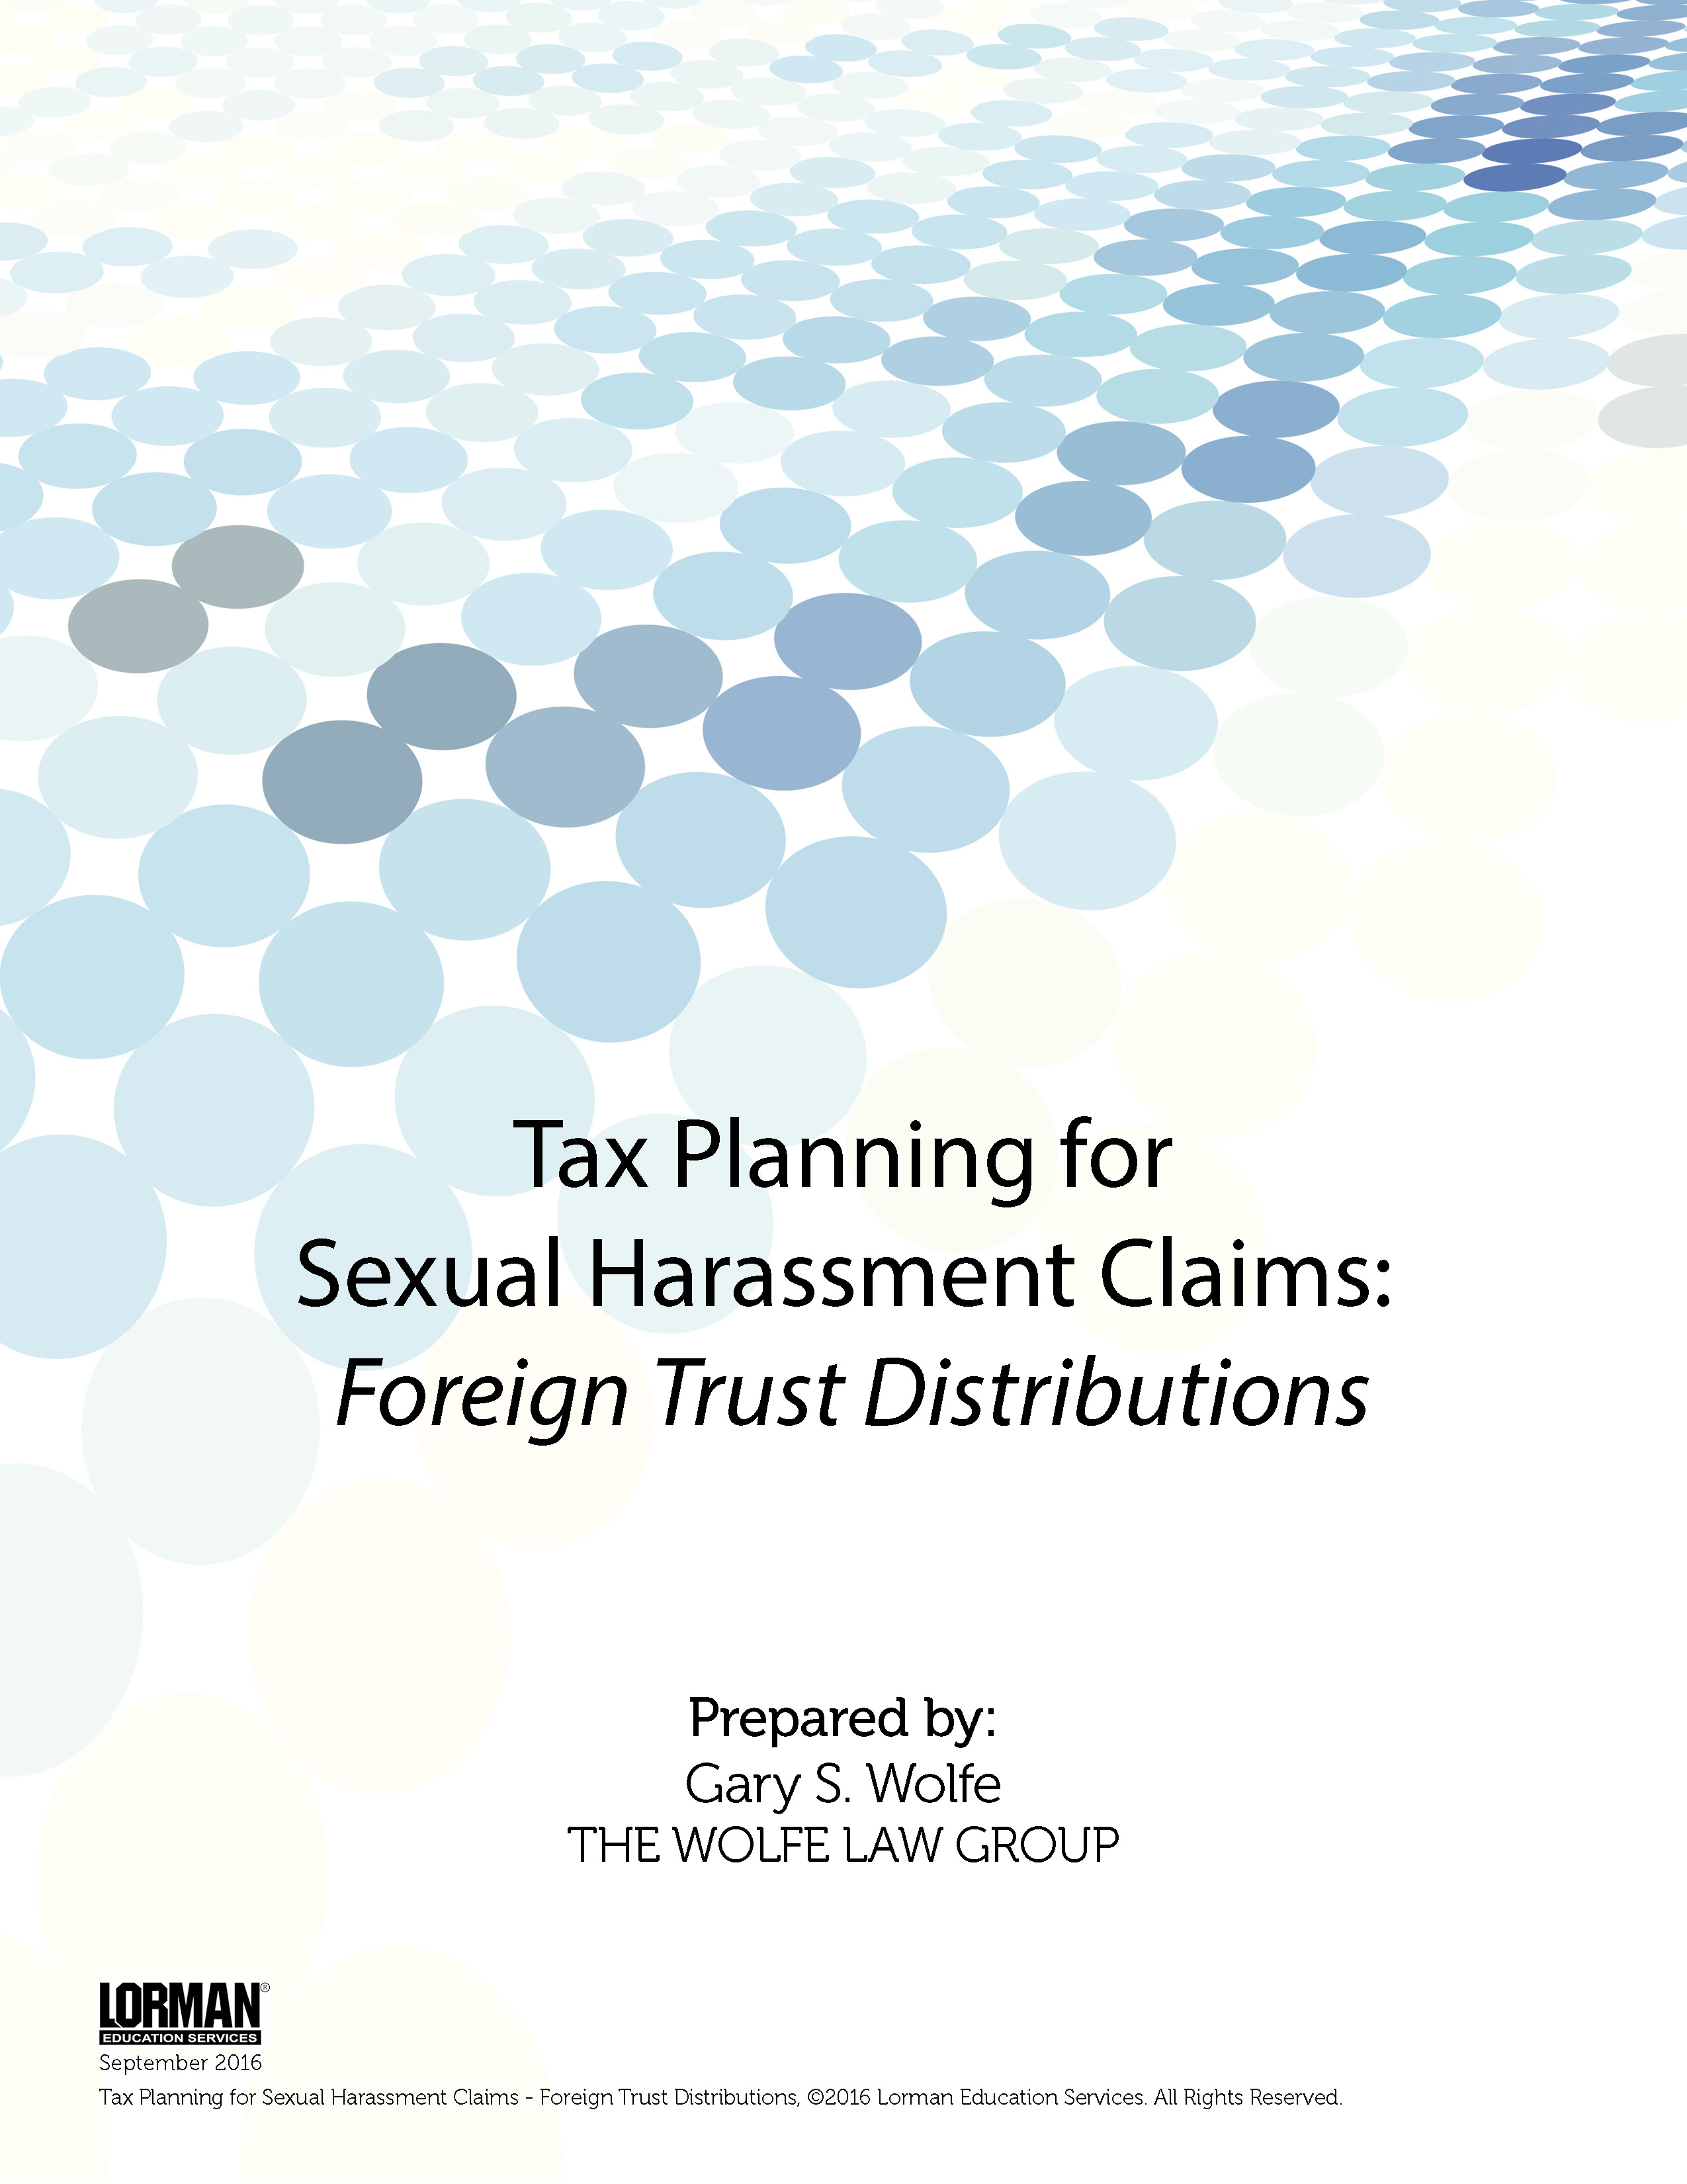 Tax Planning for Sexual Harassment Claims - Foreign Trust Distributions